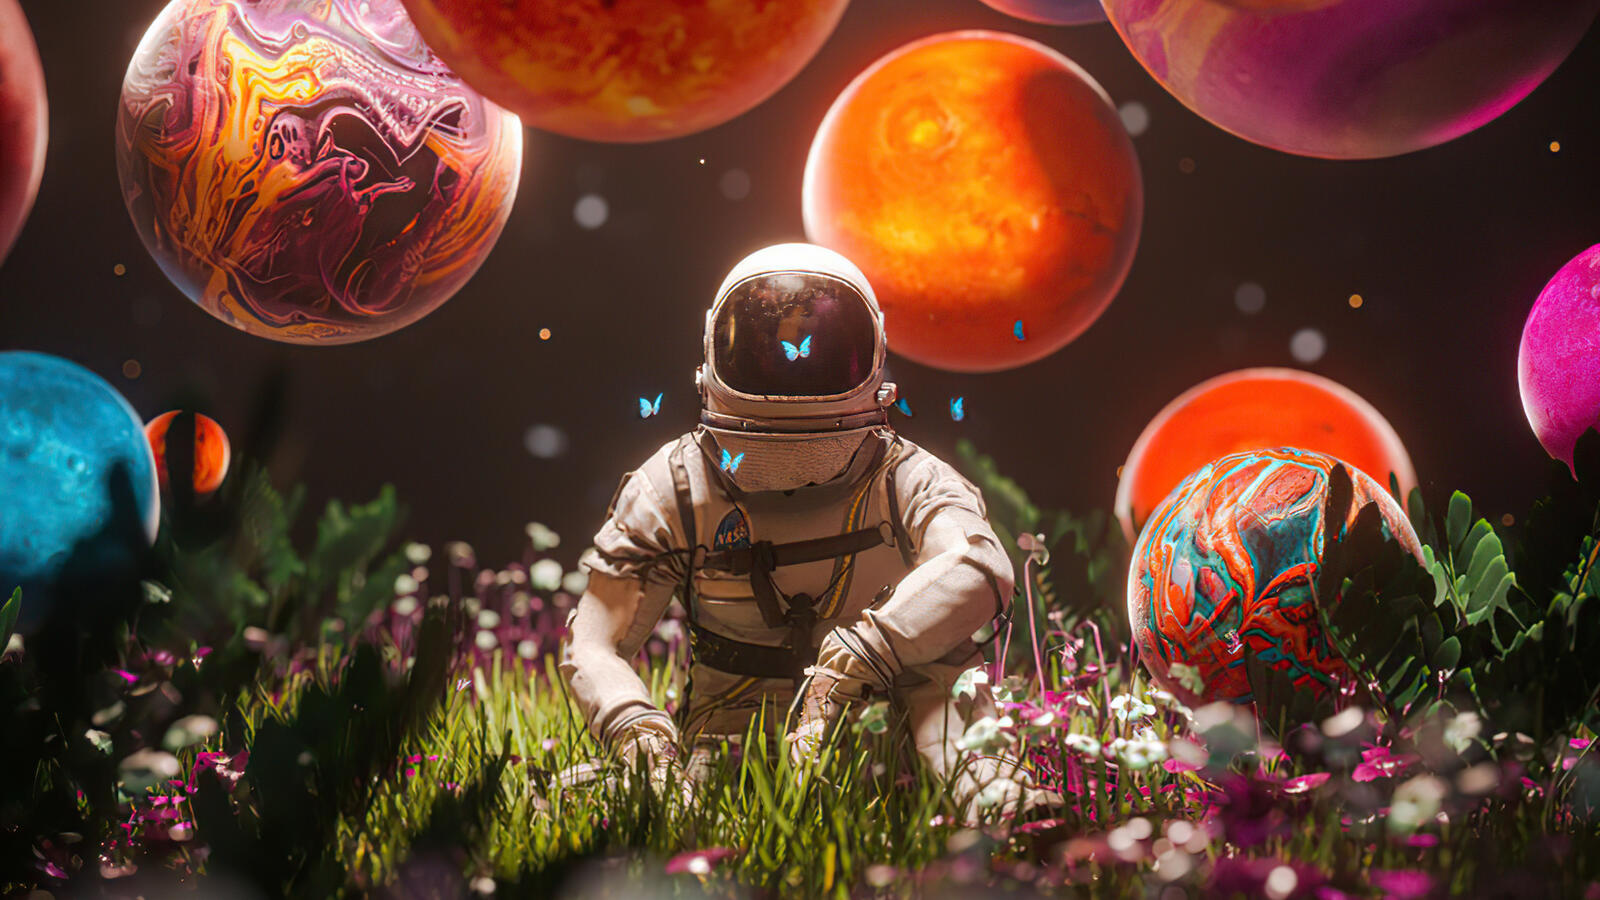 Free photo A fantastic photo of an astronaut and a planet